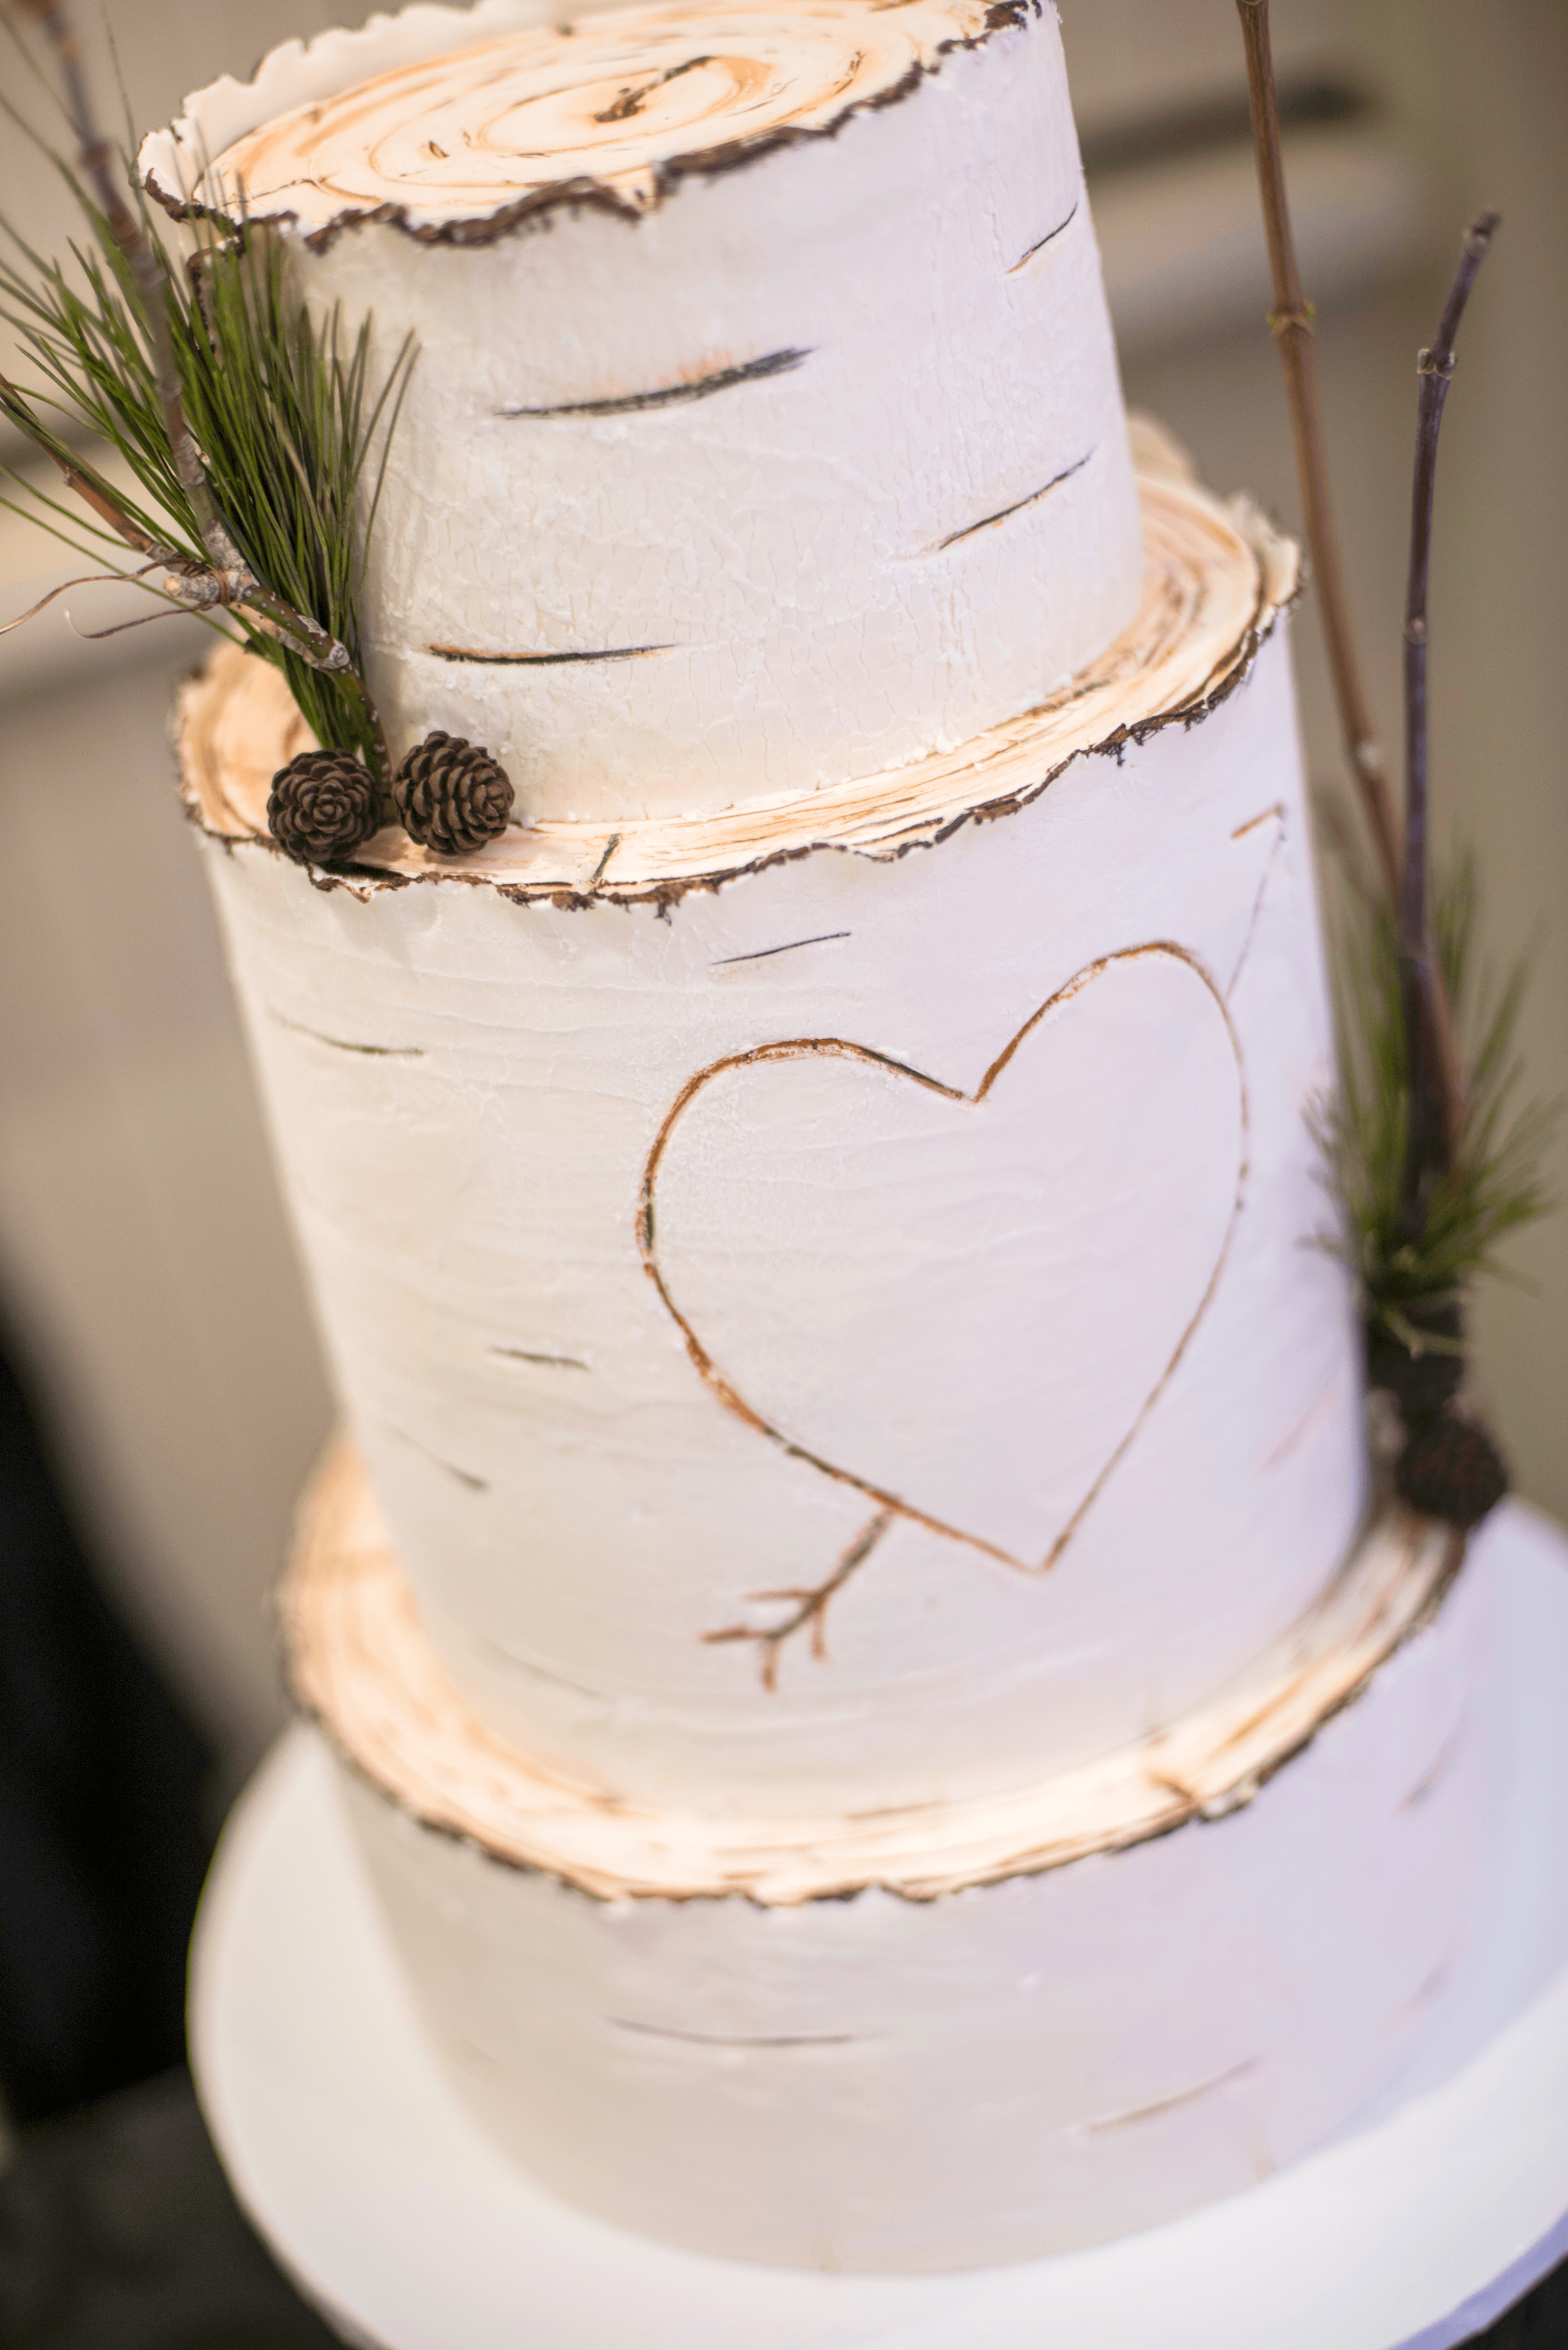 A three-tiered white cake resembling birch bark has pine springs and cones as well as a heart with an arrow through it carved into the front. Made by the culinary team at Paradise Banquet Halls.